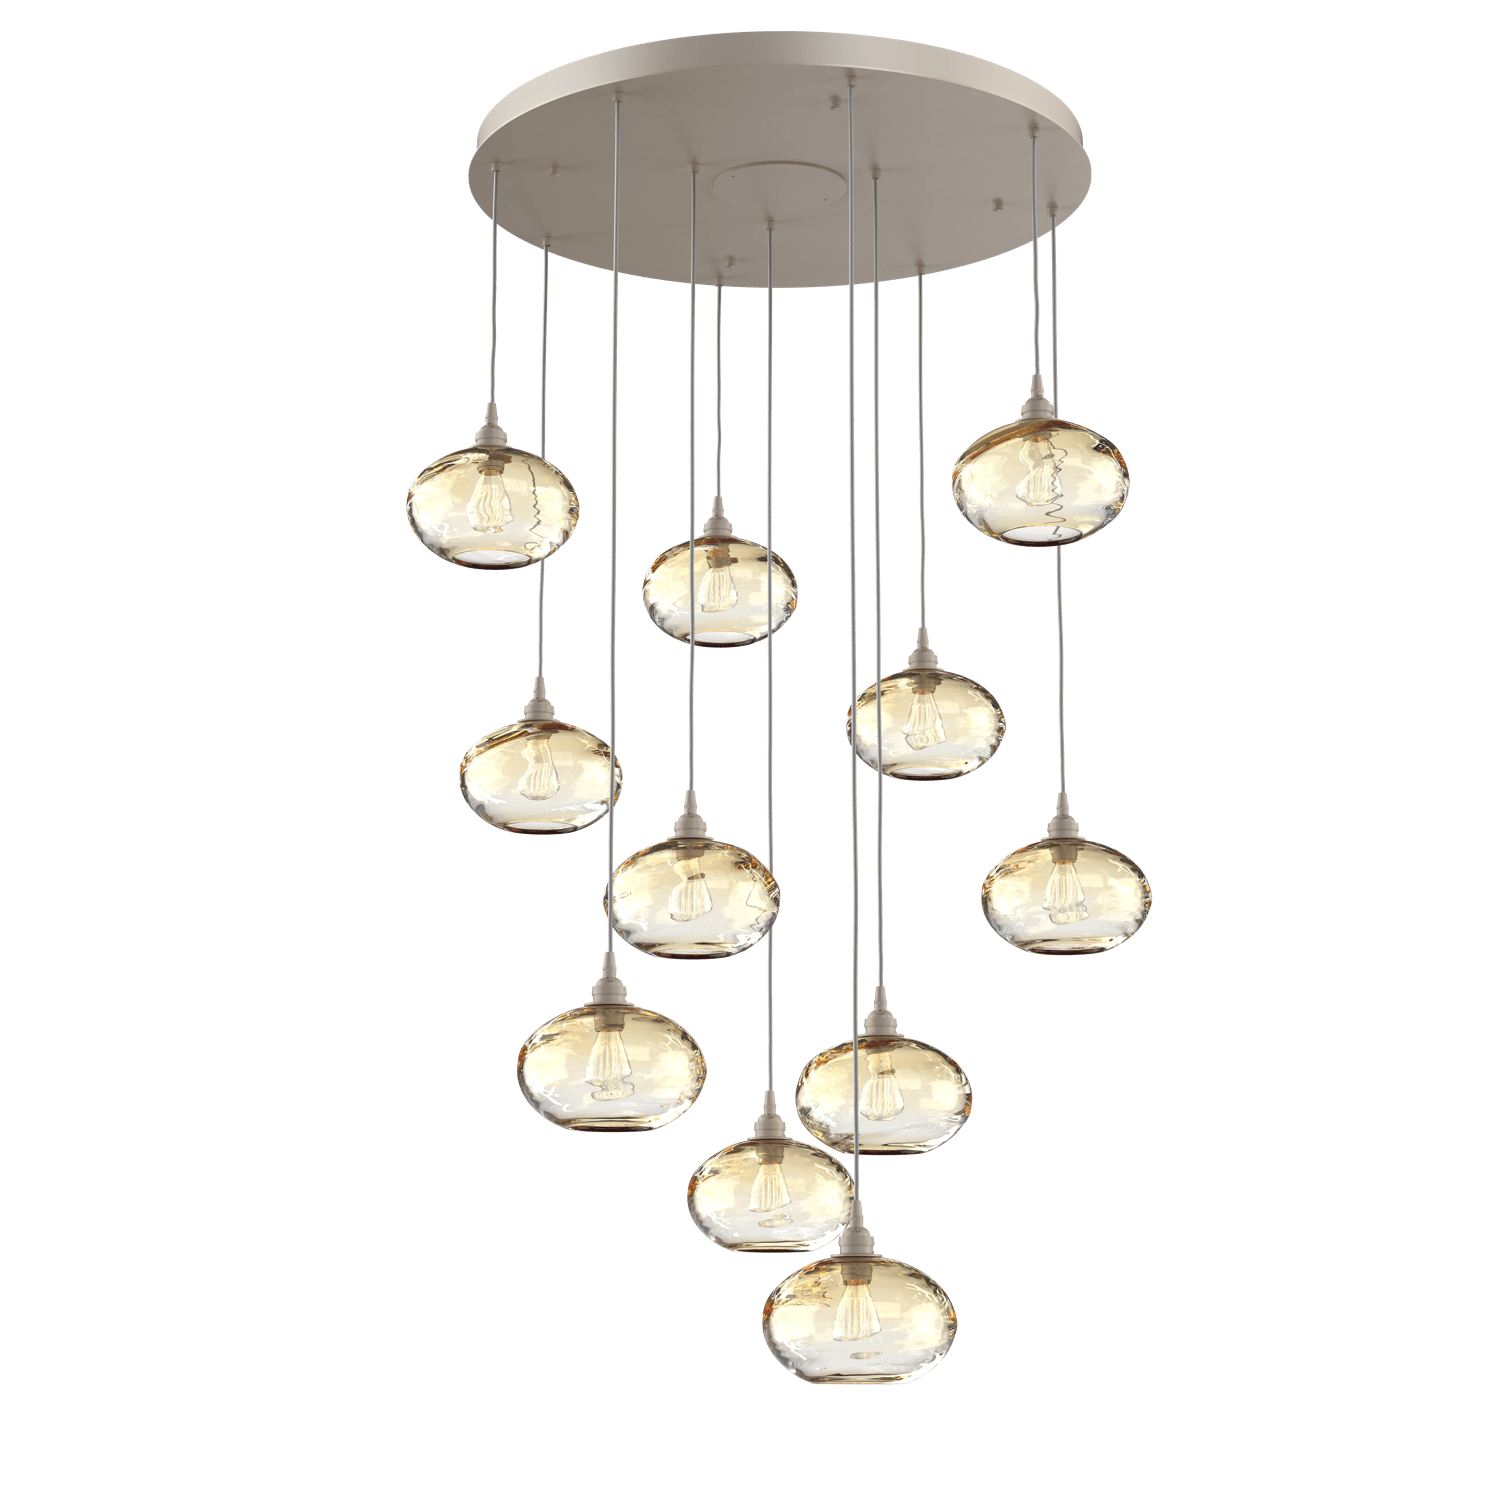 CHB0036-11-BS-OA-Hammerton-Studio-Optic-Blown-Glass-Coppa-11-light-round-pendant-chandelier-with-metallic-beige-silver-finish-and-optic-amber-blown-glass-shades-and-incandescent-lamping